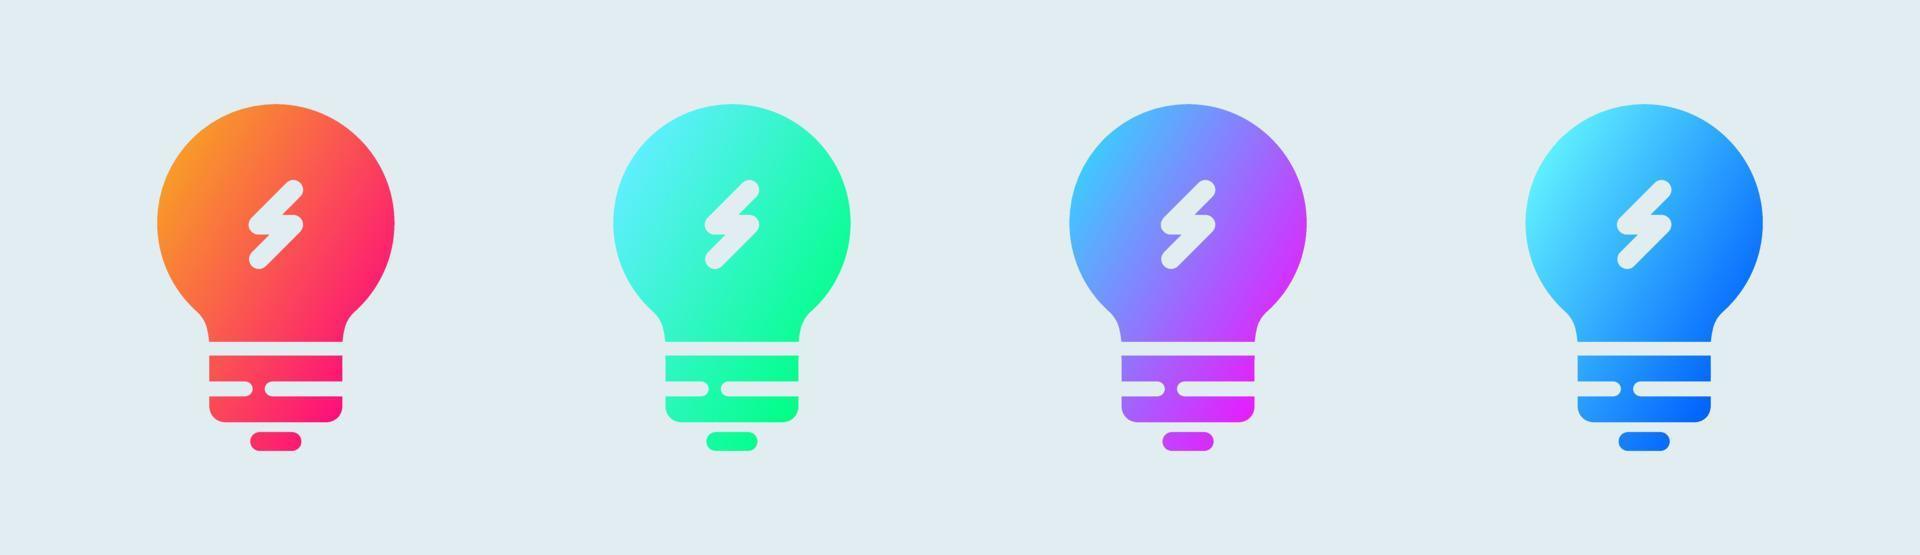 Light bulb solid icon in gradient colors. Idea signs vector illustration.